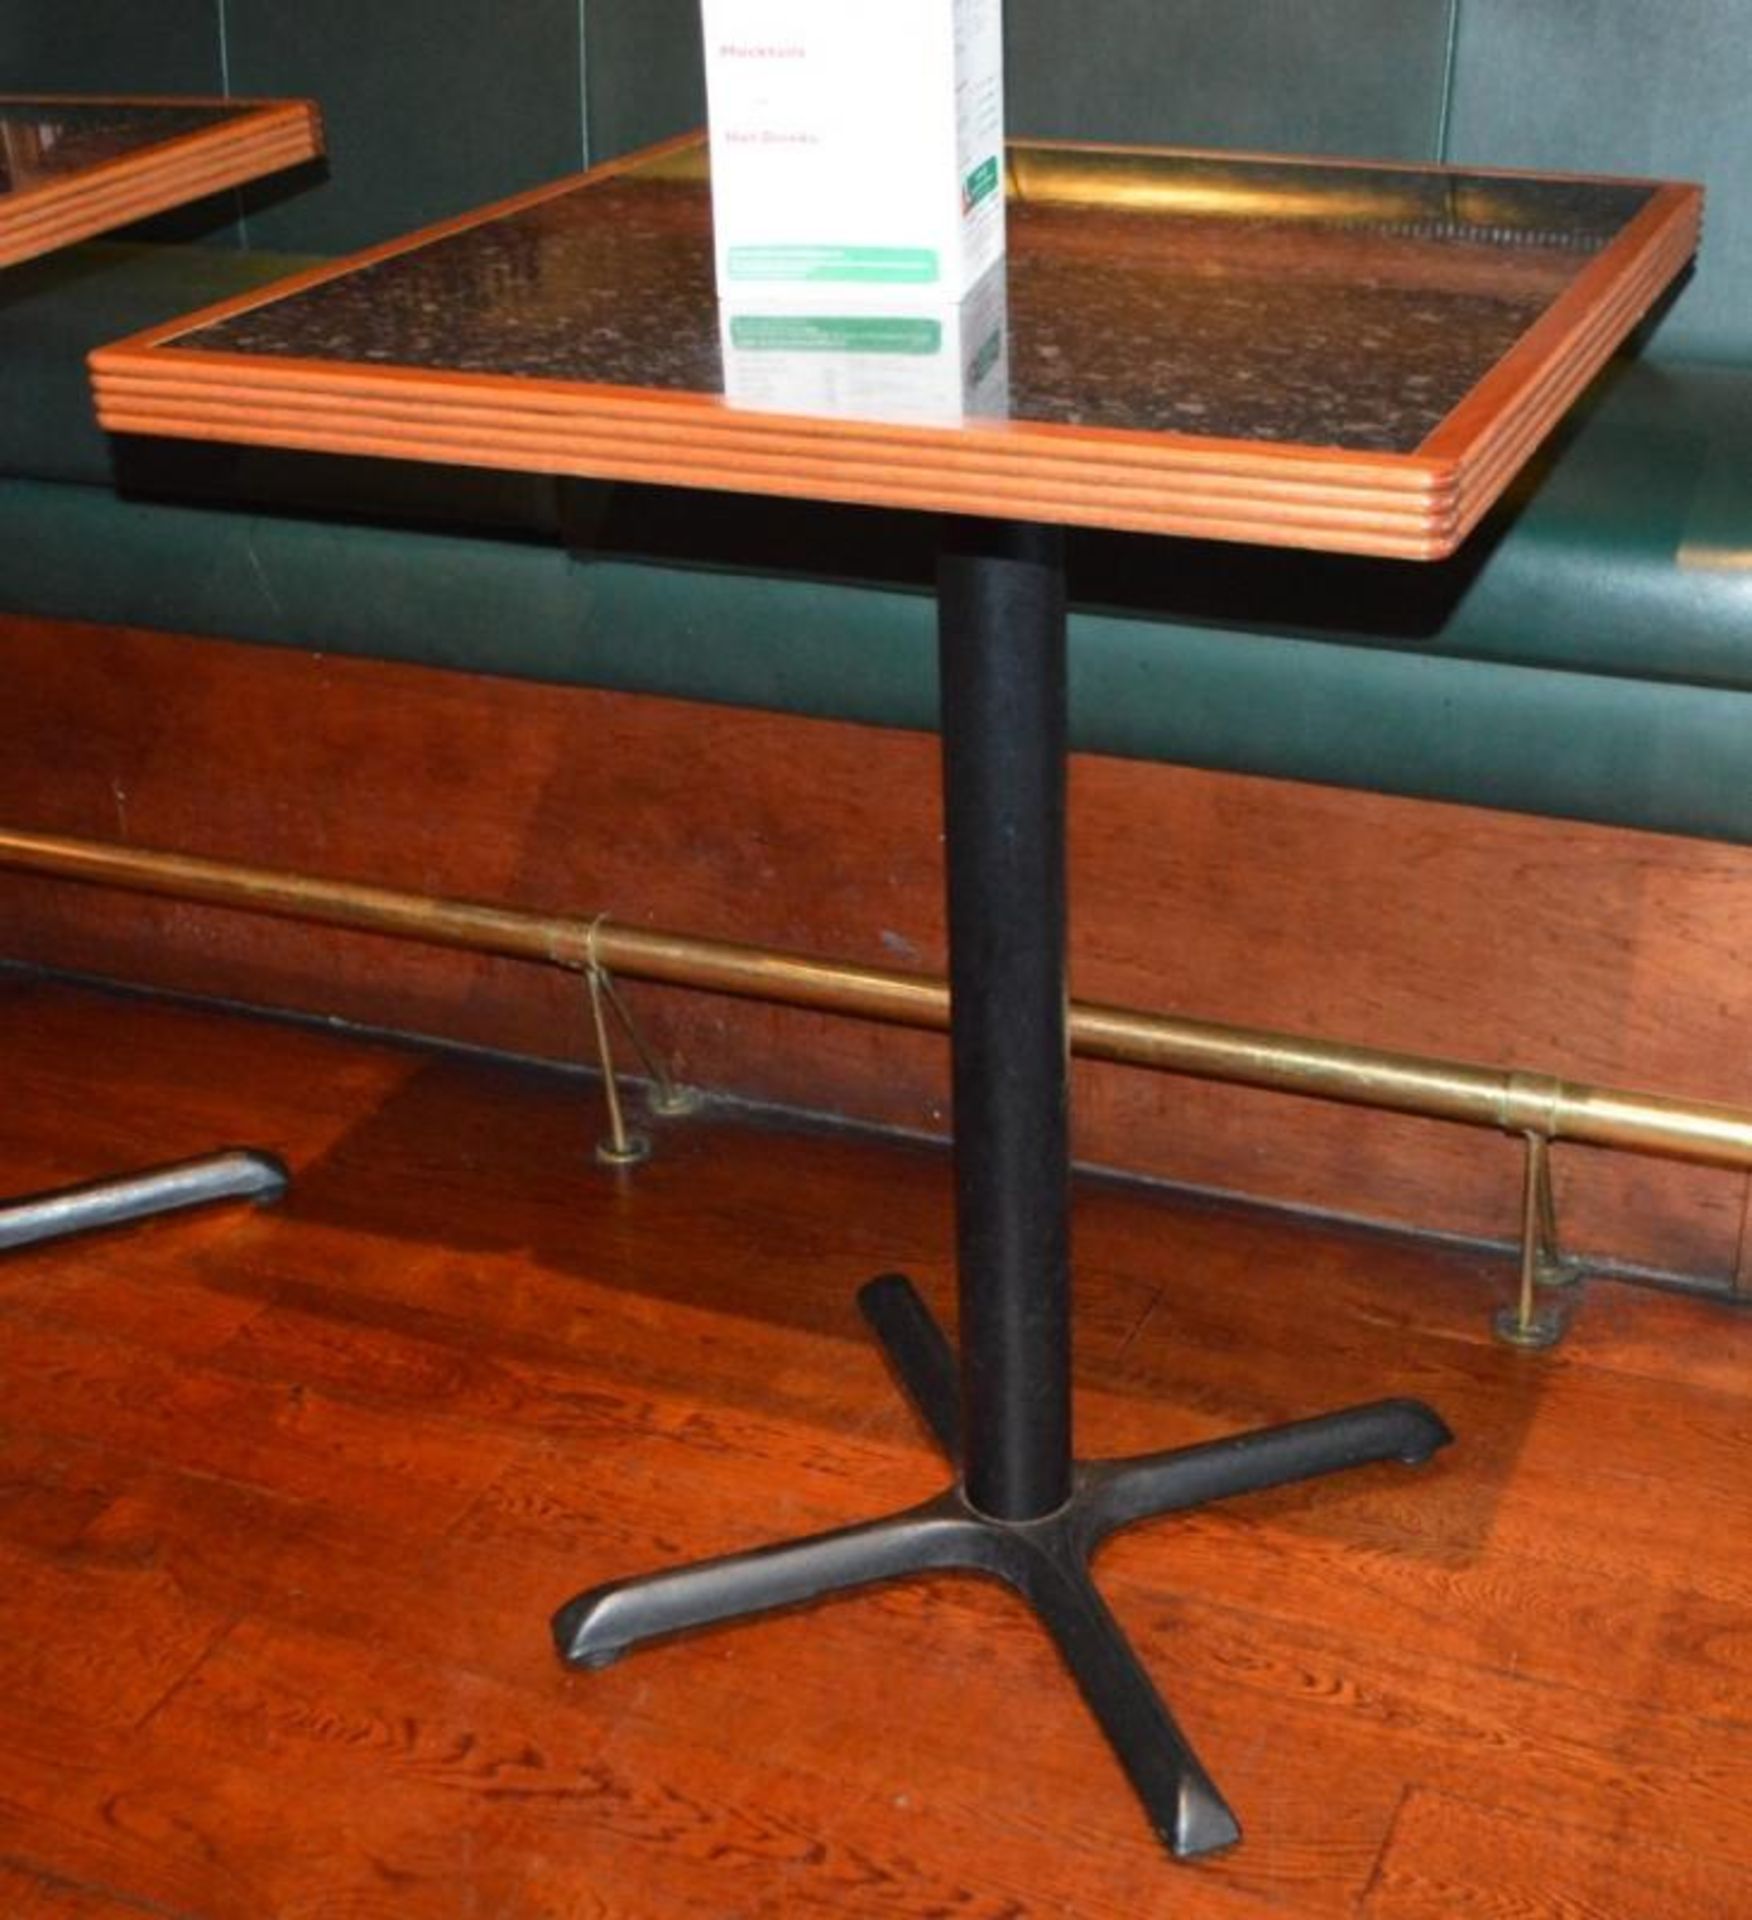 2 x Poser Bar Tables With Granite Effect Surface, Wooden Edging and Cast Iron Bases - H104 x W80 x D - Image 2 of 4